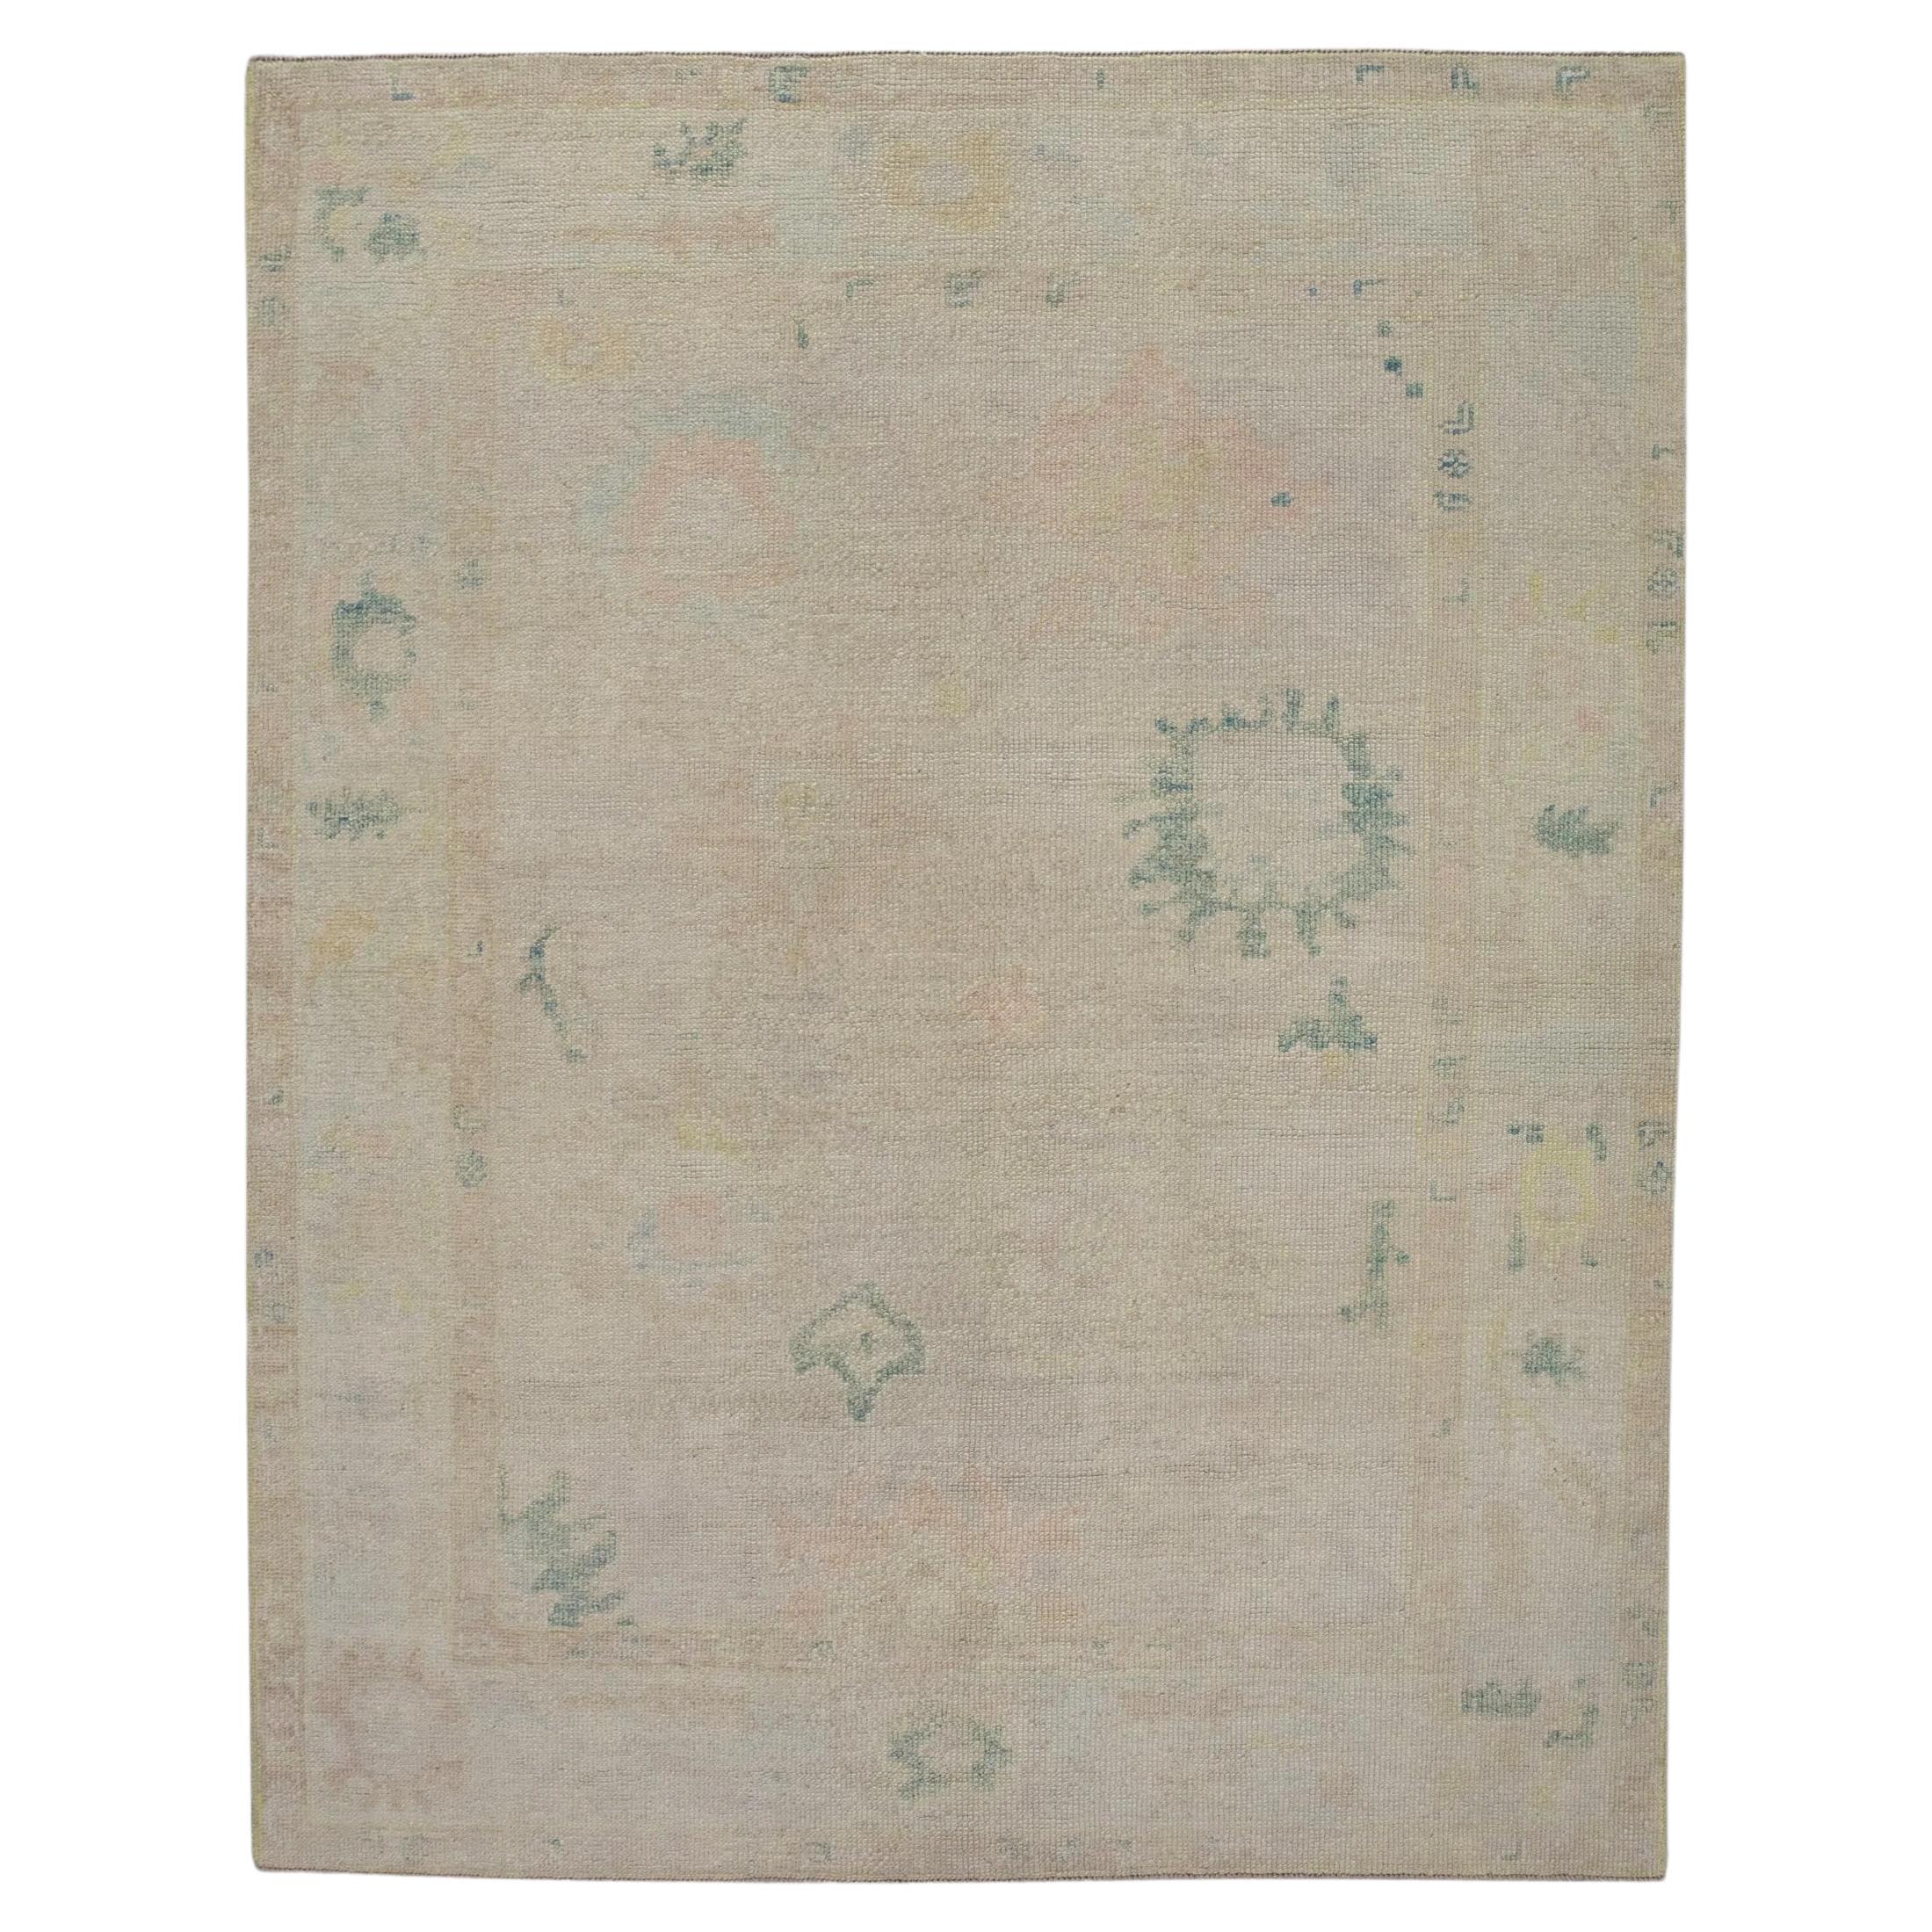 Floral Handwoven Wool Turkish Oushak Rug in Colorful Pastel Shades 5'1" x 6'5" For Sale